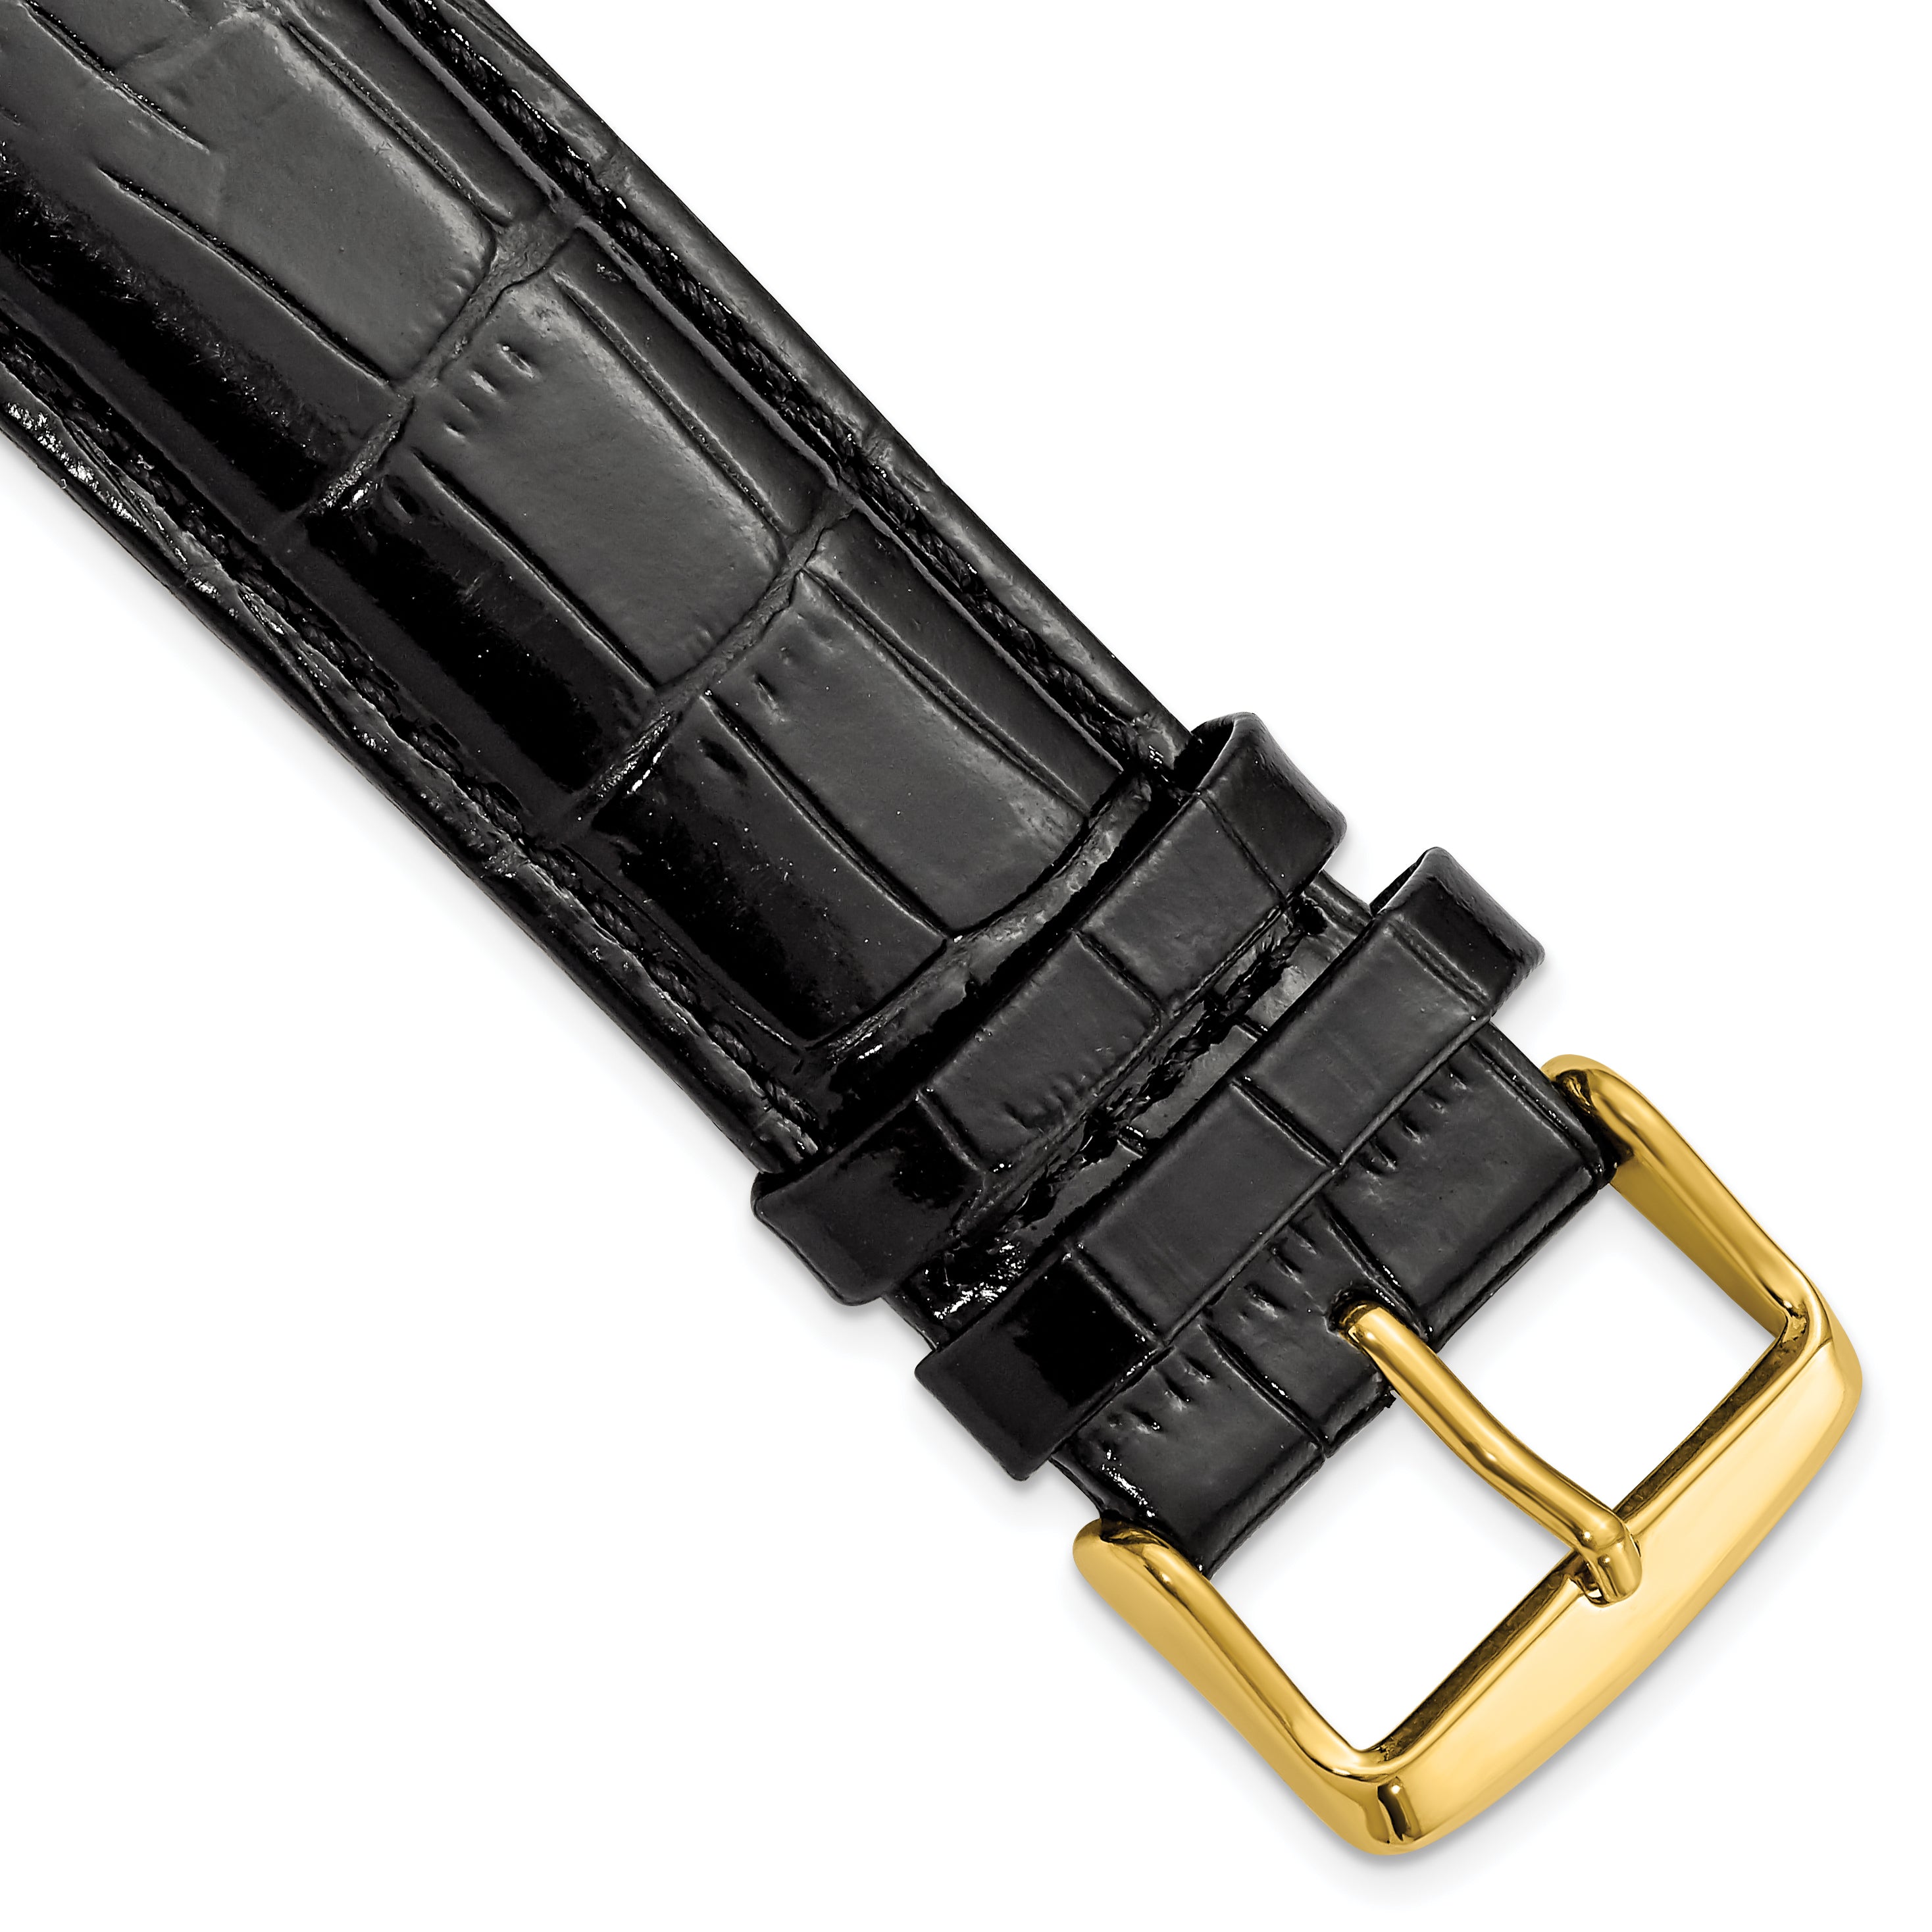 DeBeer 24mm Black Crocodile Grain Chronograph Leather with Gold-tone Buckle 7.5 inch Watch Band